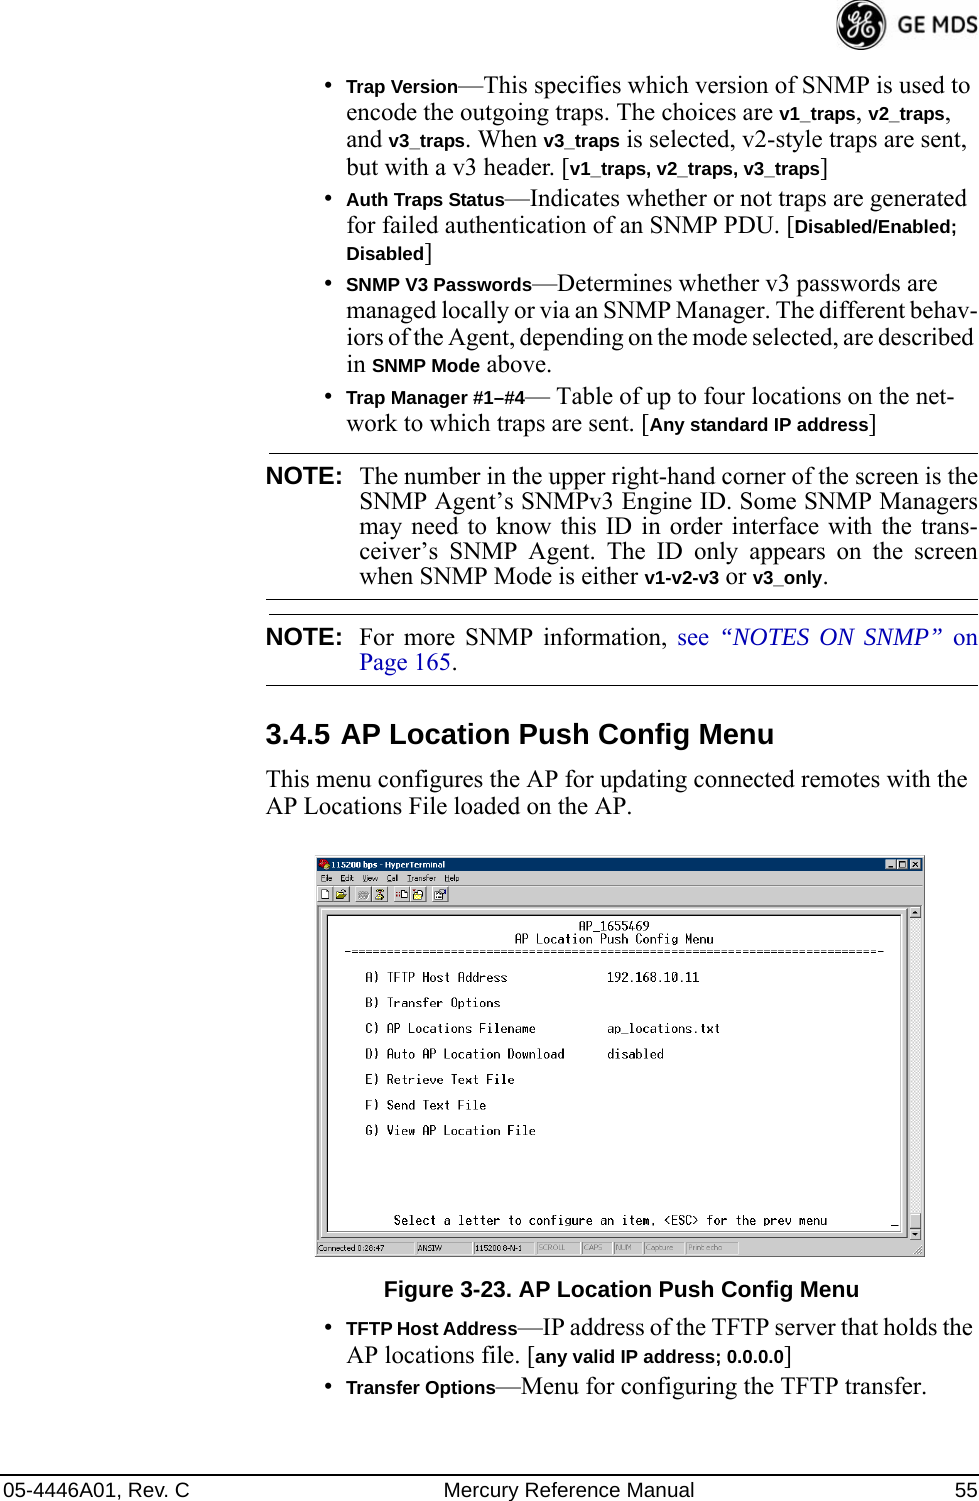 05-4446A01, Rev. C Mercury Reference Manual 55•Trap Version—This specifies which version of SNMP is used to encode the outgoing traps. The choices are v1_traps, v2_traps, and v3_traps. When v3_traps is selected, v2-style traps are sent, but with a v3 header. [v1_traps, v2_traps, v3_traps]•Auth Traps Status—Indicates whether or not traps are generated for failed authentication of an SNMP PDU. [Disabled/Enabled; Disabled]•SNMP V3 Passwords—Determines whether v3 passwords are managed locally or via an SNMP Manager. The different behav-iors of the Agent, depending on the mode selected, are described in SNMP Mode above.•Trap Manager #1–#4— Table of up to four locations on the net-work to which traps are sent. [Any standard IP address]NOTE: The number in the upper right-hand corner of the screen is theSNMP Agent’s SNMPv3 Engine ID. Some SNMP Managersmay need to know this ID in order interface with the trans-ceiver’s SNMP Agent. The ID only appears on the screenwhen SNMP Mode is either v1-v2-v3 or v3_only.NOTE: For more SNMP information, see  “NOTES ON SNMP” onPage 165.3.4.5 AP Location Push Config MenuThis menu configures the AP for updating connected remotes with the AP Locations File loaded on the AP.Invisible place holderFigure 3-23. AP Location Push Config Menu•TFTP Host Address—IP address of the TFTP server that holds the AP locations file. [any valid IP address; 0.0.0.0]•Transfer Options—Menu for configuring the TFTP transfer.